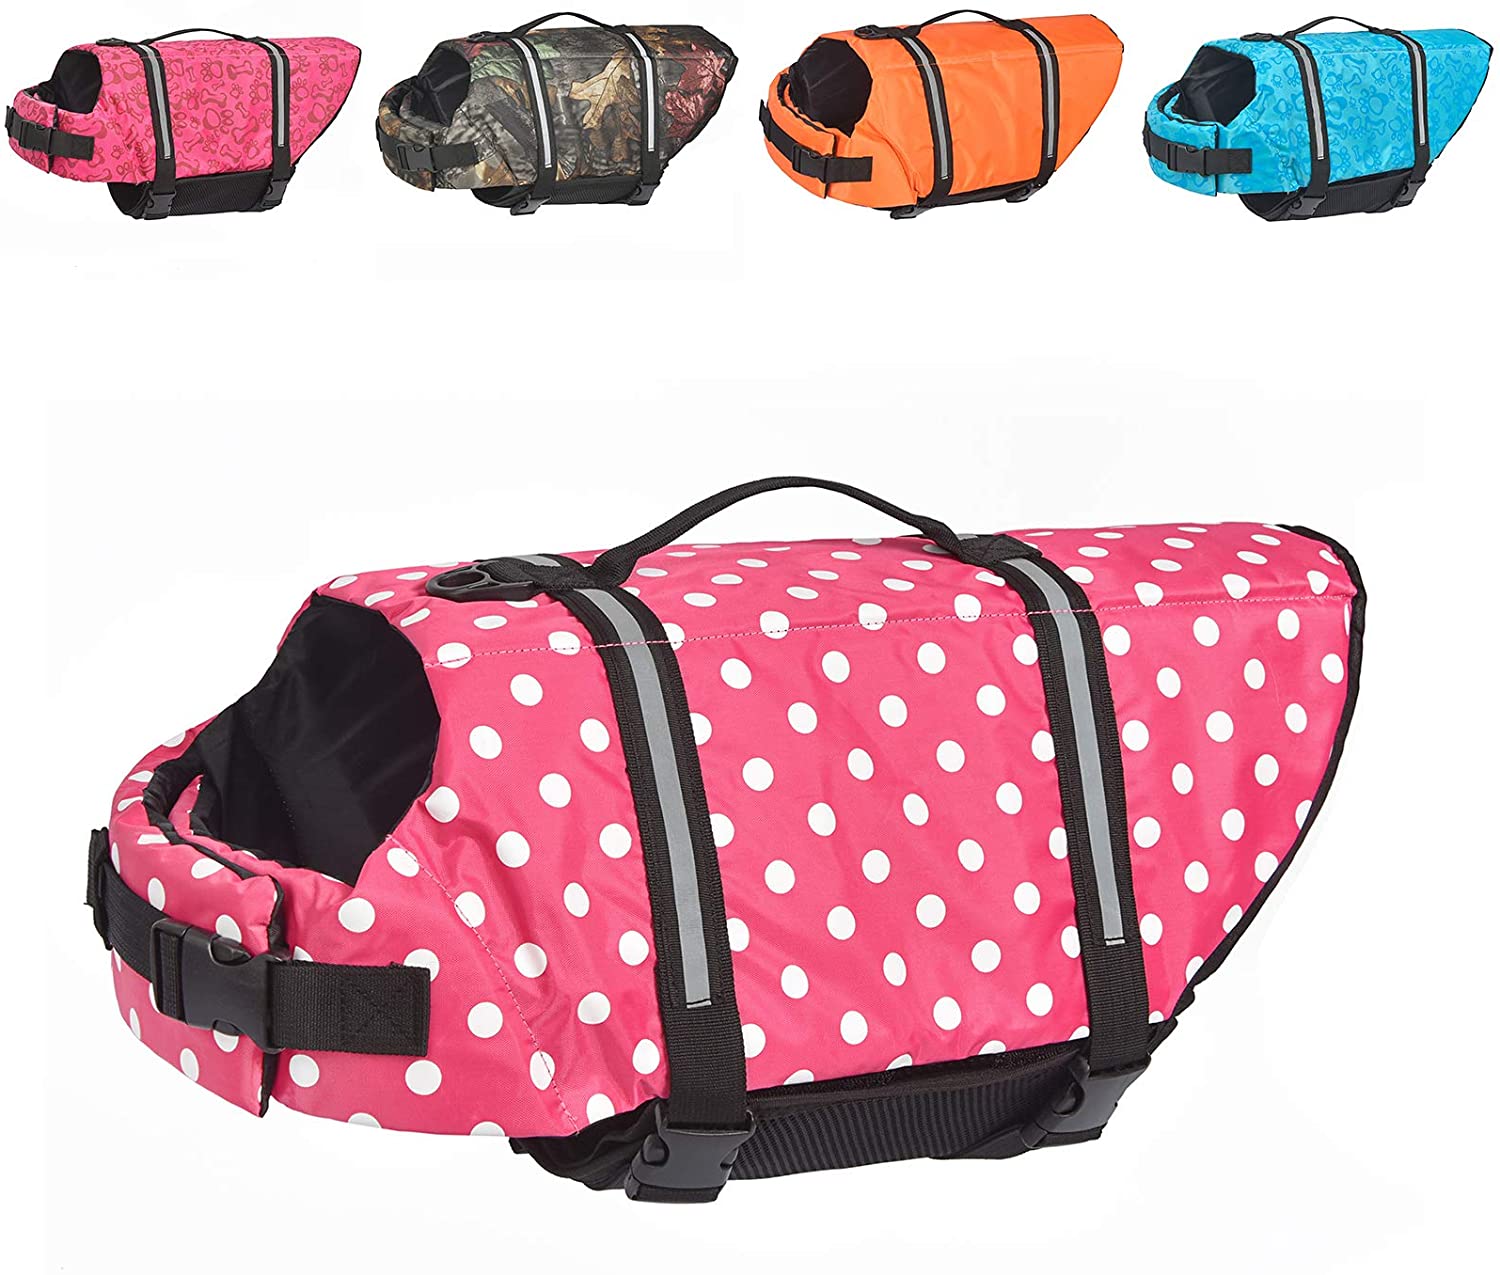 Blue Ripstop Pet Floatation Angel Life Vest for Small Middle Large Dog ROZKITCH Dog Life Jacket Safe Durable Comfortable Adjustable Preserver with High Buoyancy for Swimming Boating at Pool Beach 